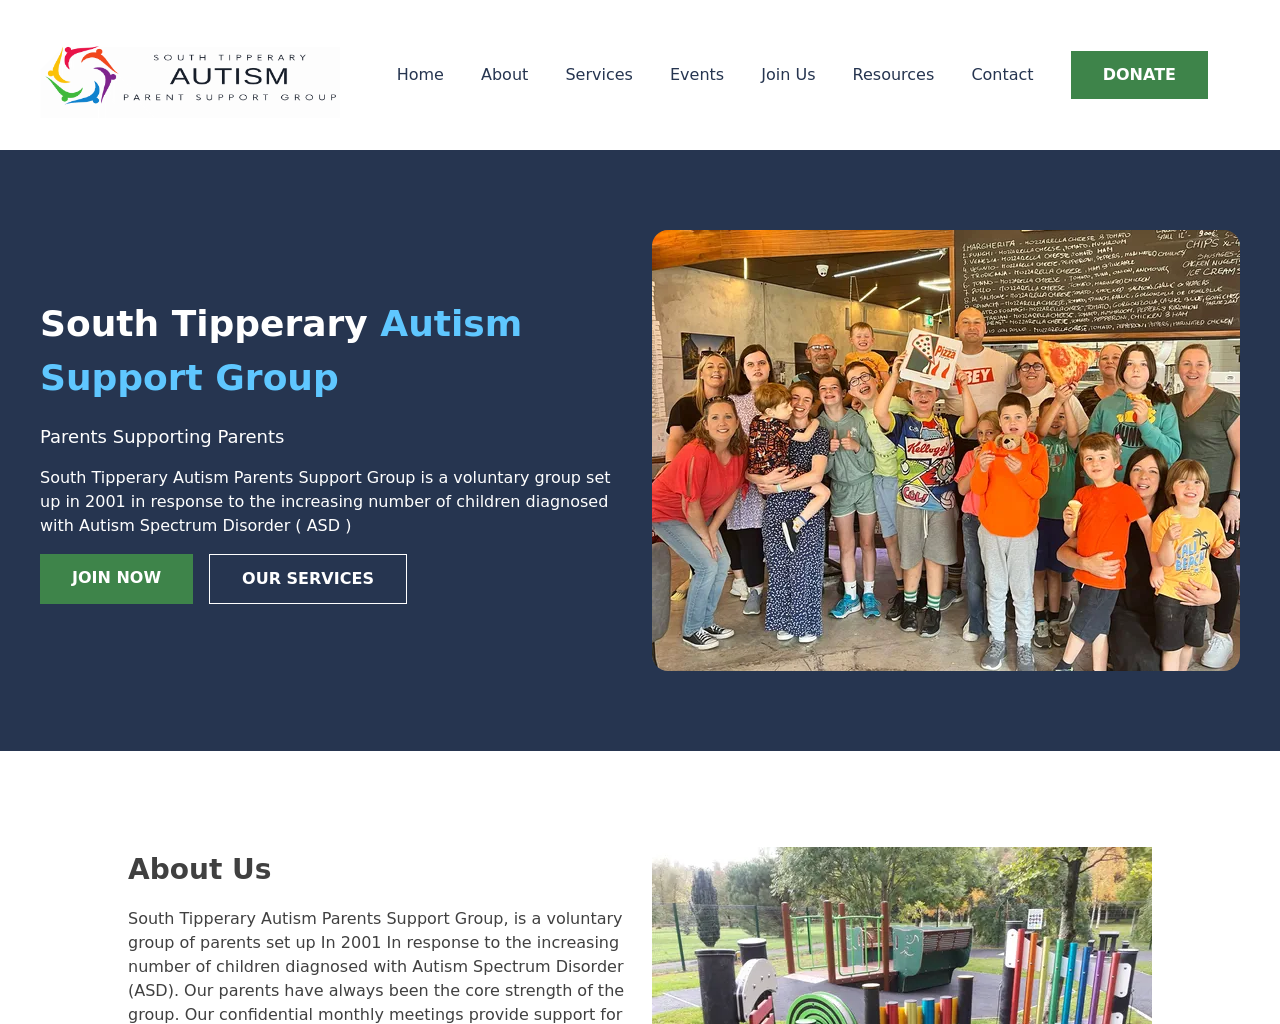 South Tipperary Autism Support Group